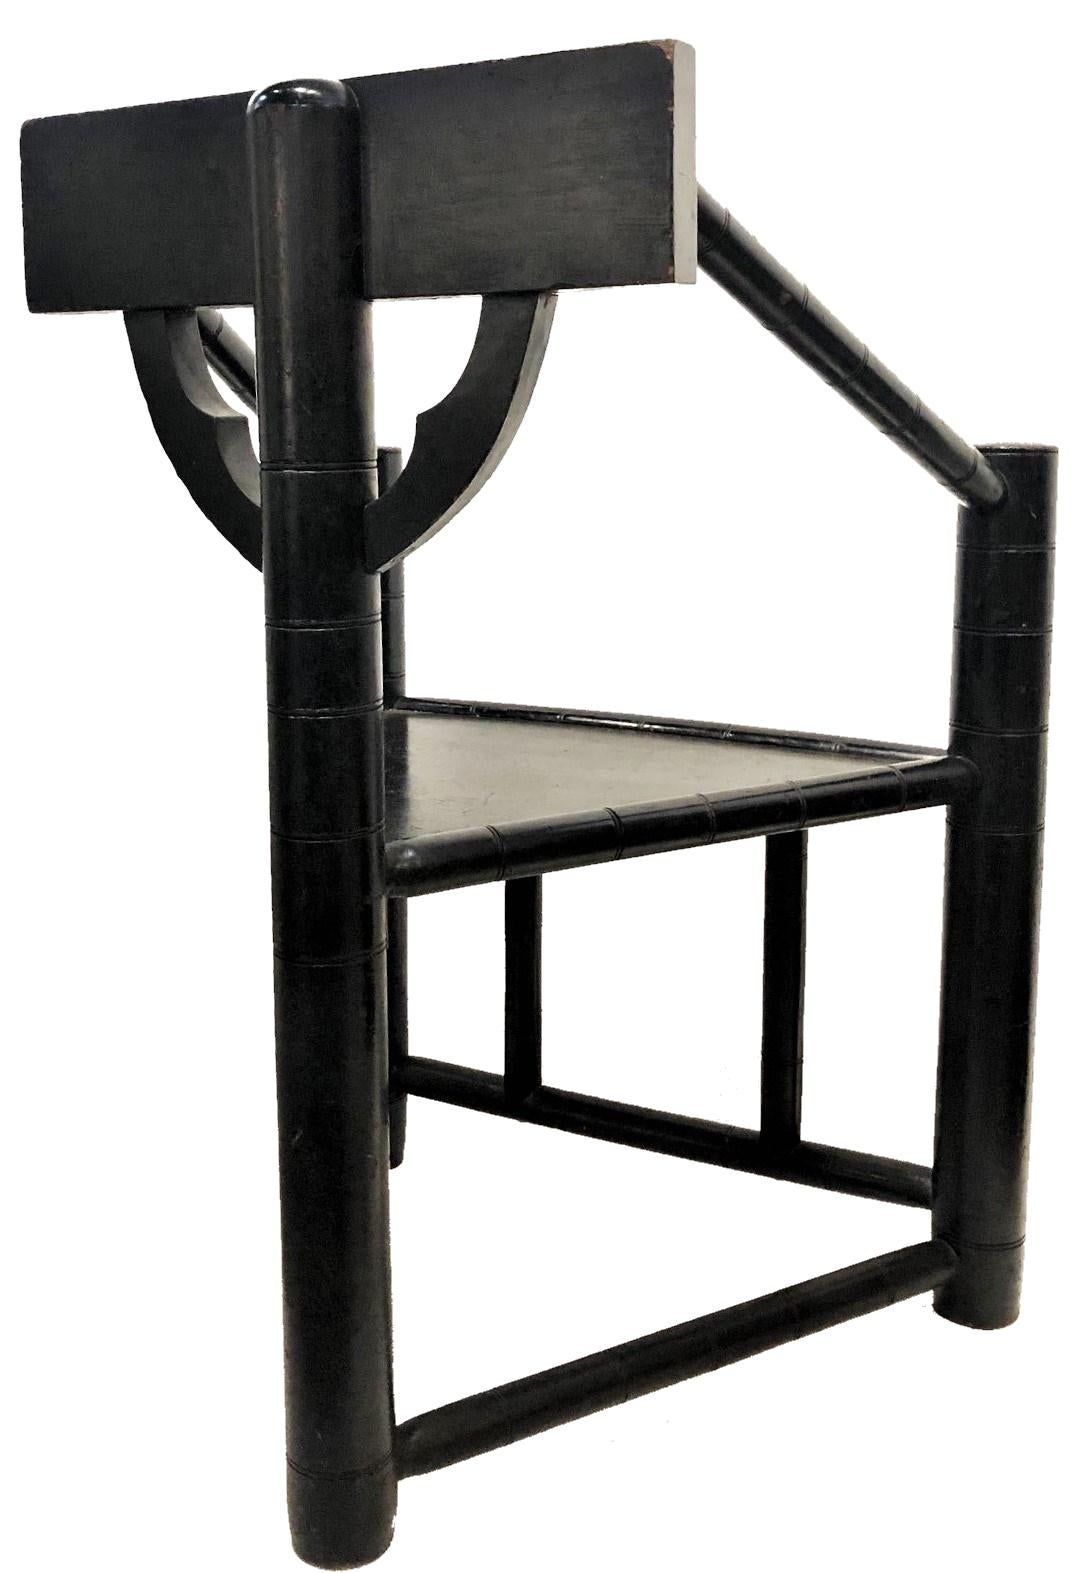 Antique Turner’s Chair 
In Old Saxon Manner
England
Late 19 Century

ABOUT
This Old Saxon style chair is made at the end of 19th Century of ebonized oak. It is in a fantastic shape and will enhance any corner it is placed. Turned chairs, also known